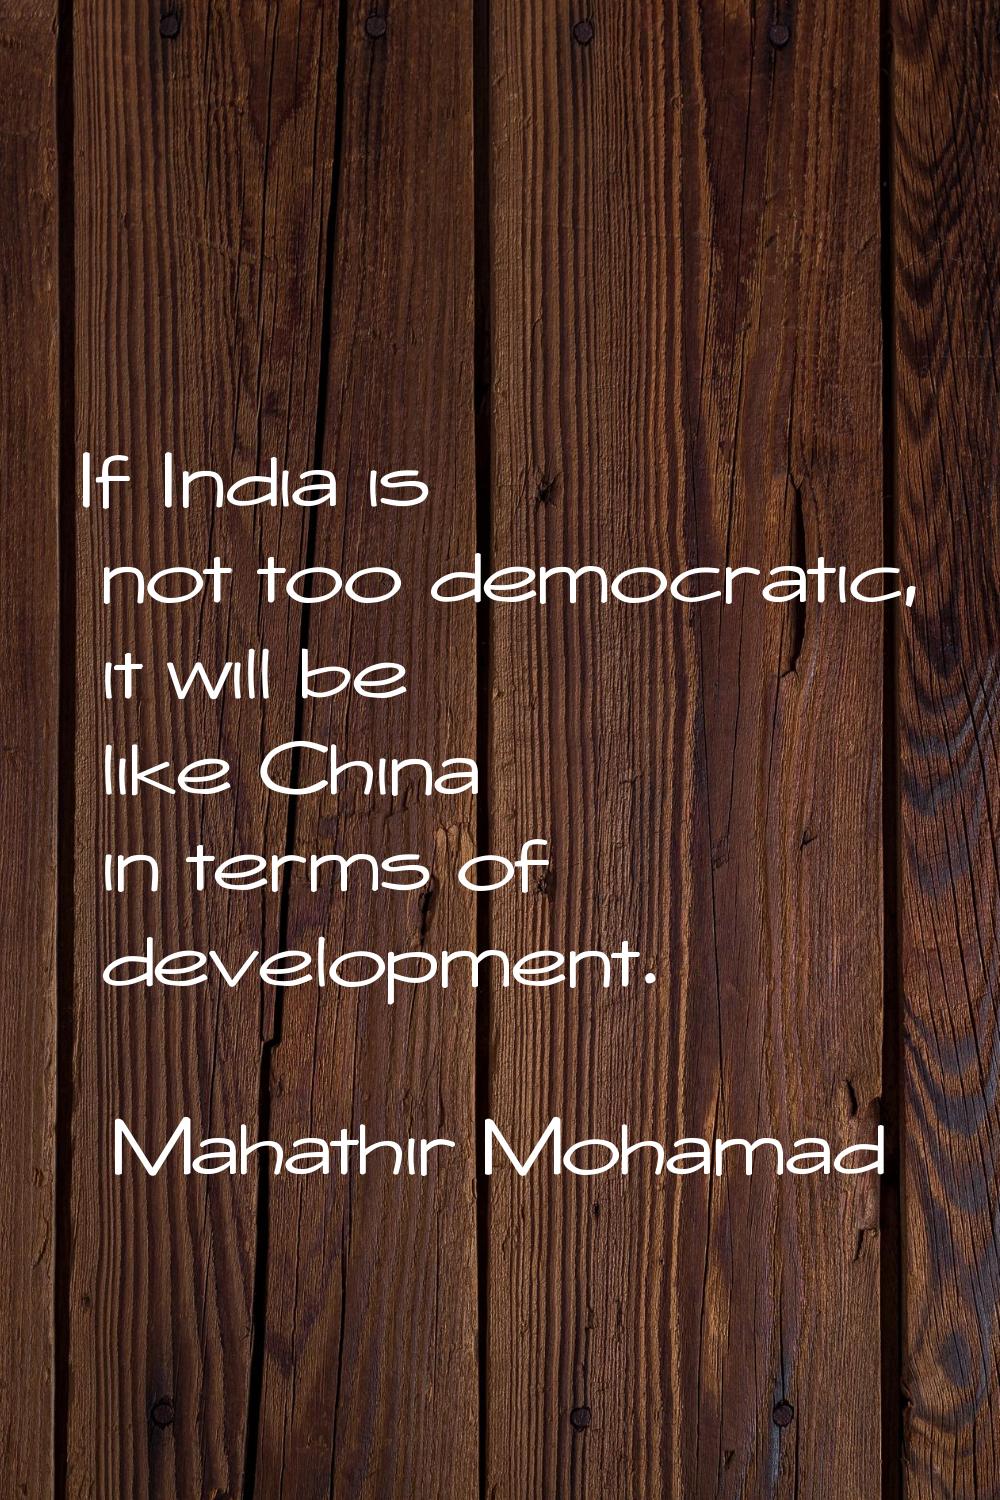 If India is not too democratic, it will be like China in terms of development.